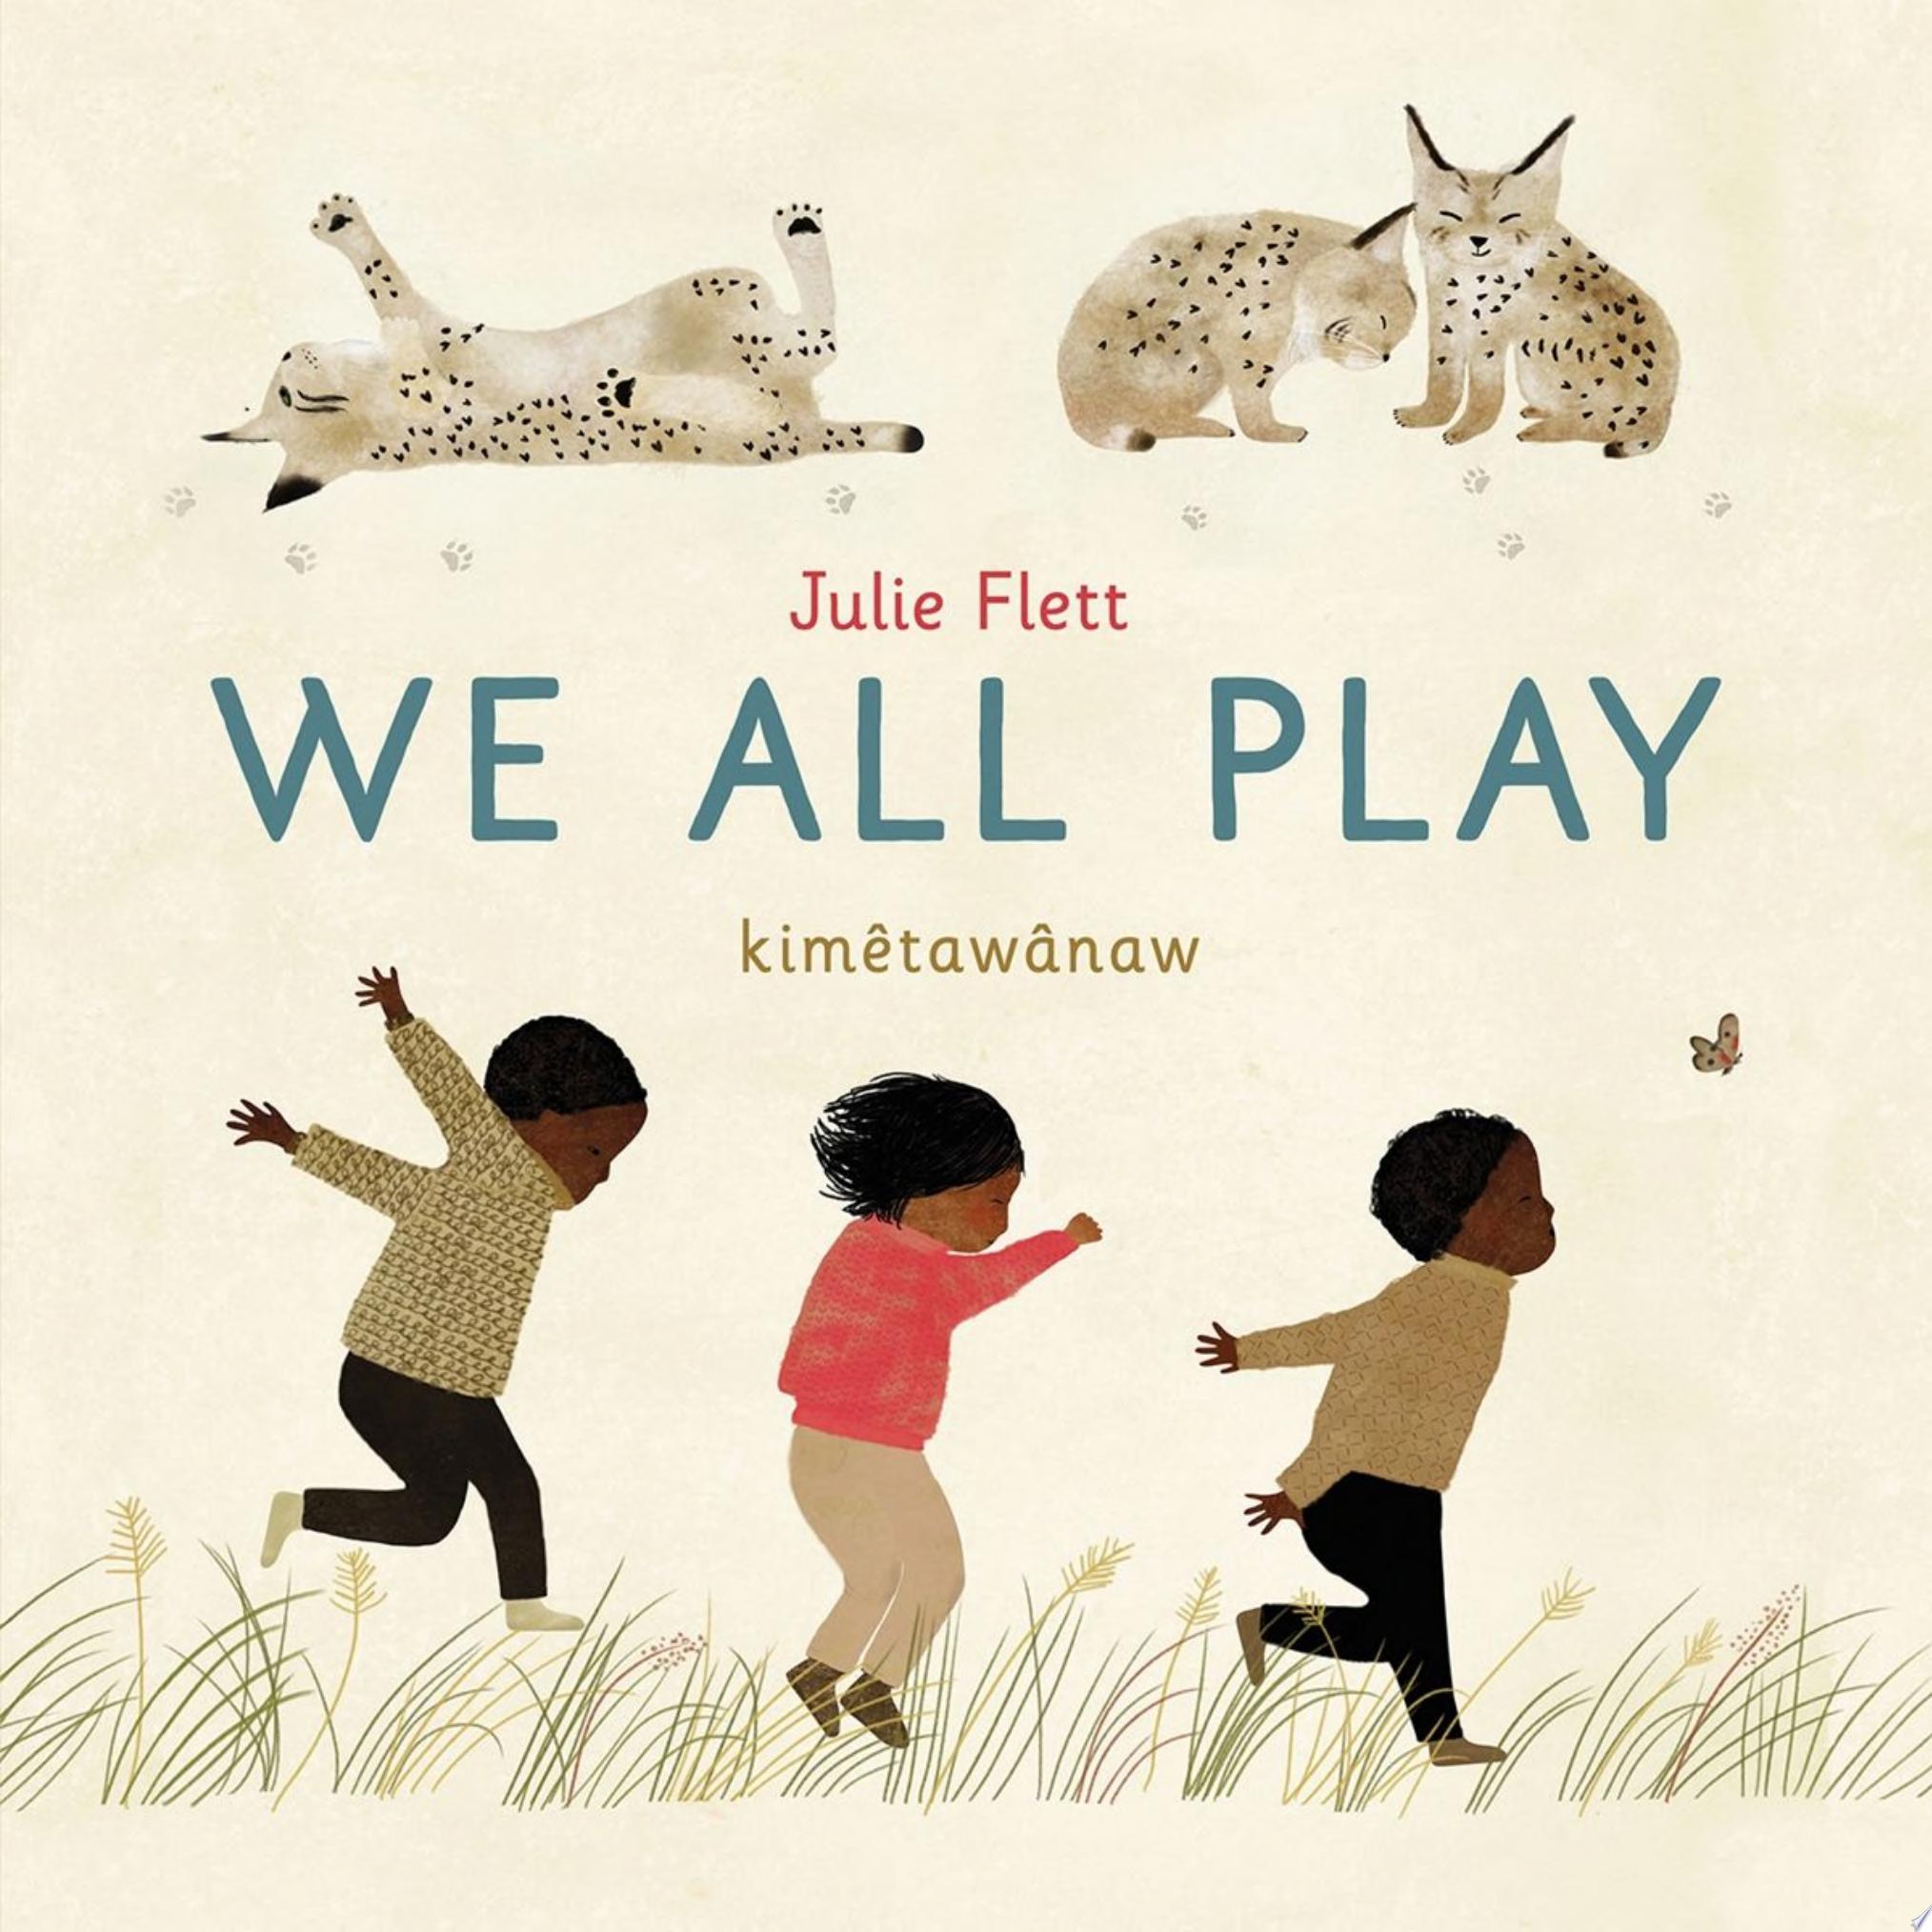 Image for "We All Play"